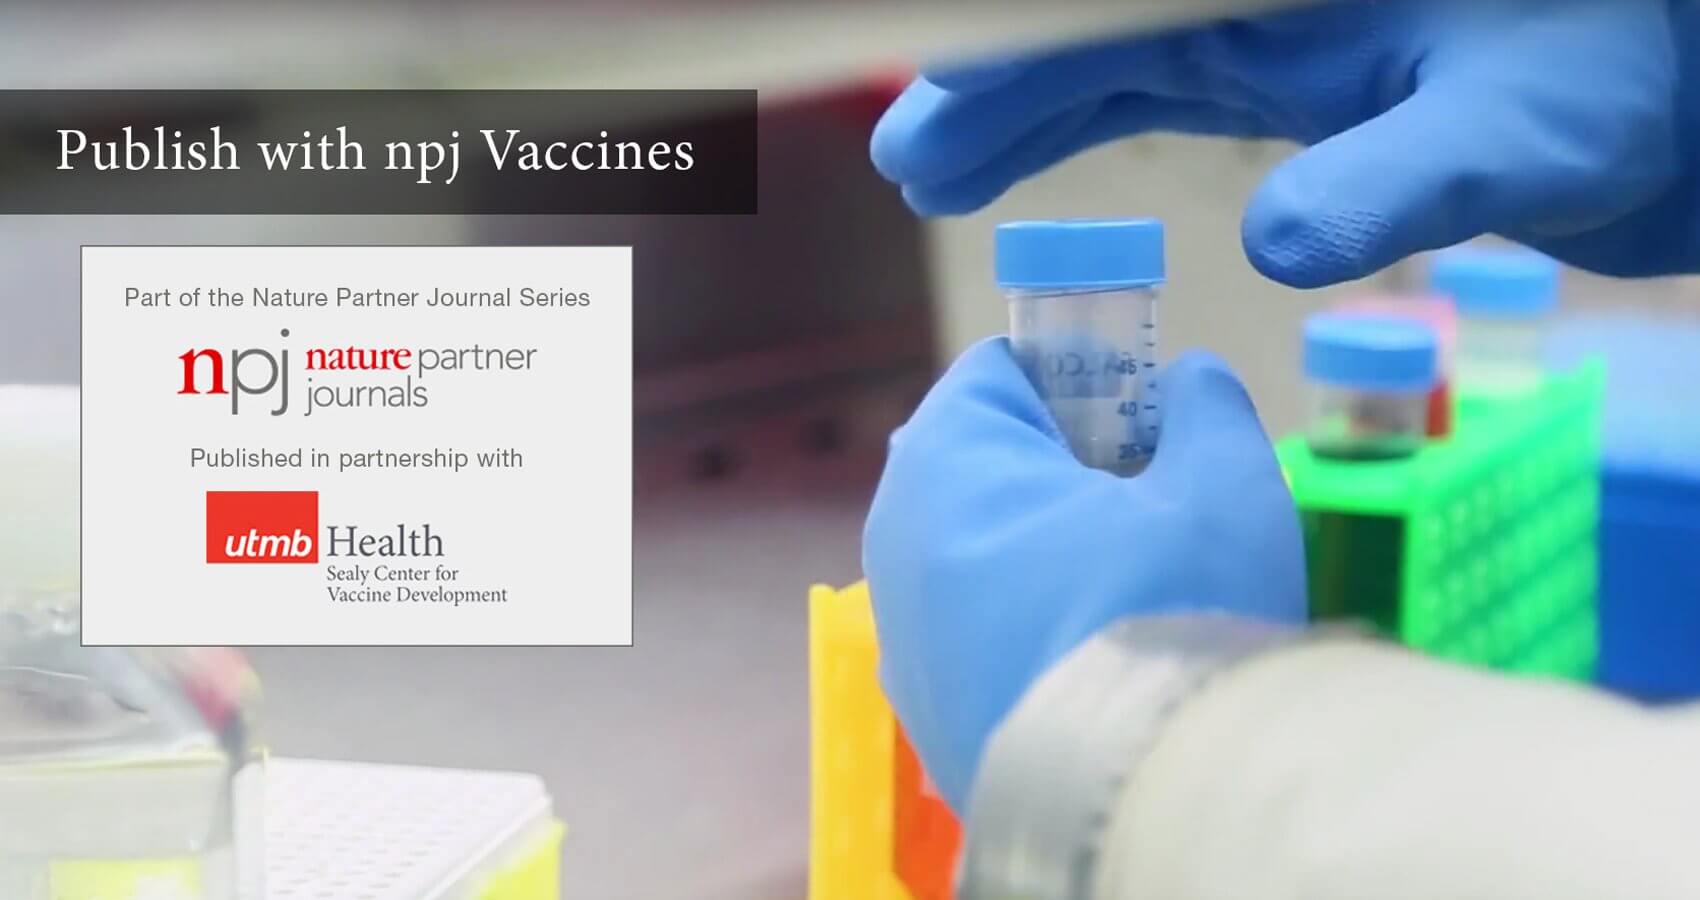 New open access journal npj Vaccines announced by Nature Publishing and The University of Texas Medical Branch - TMC News